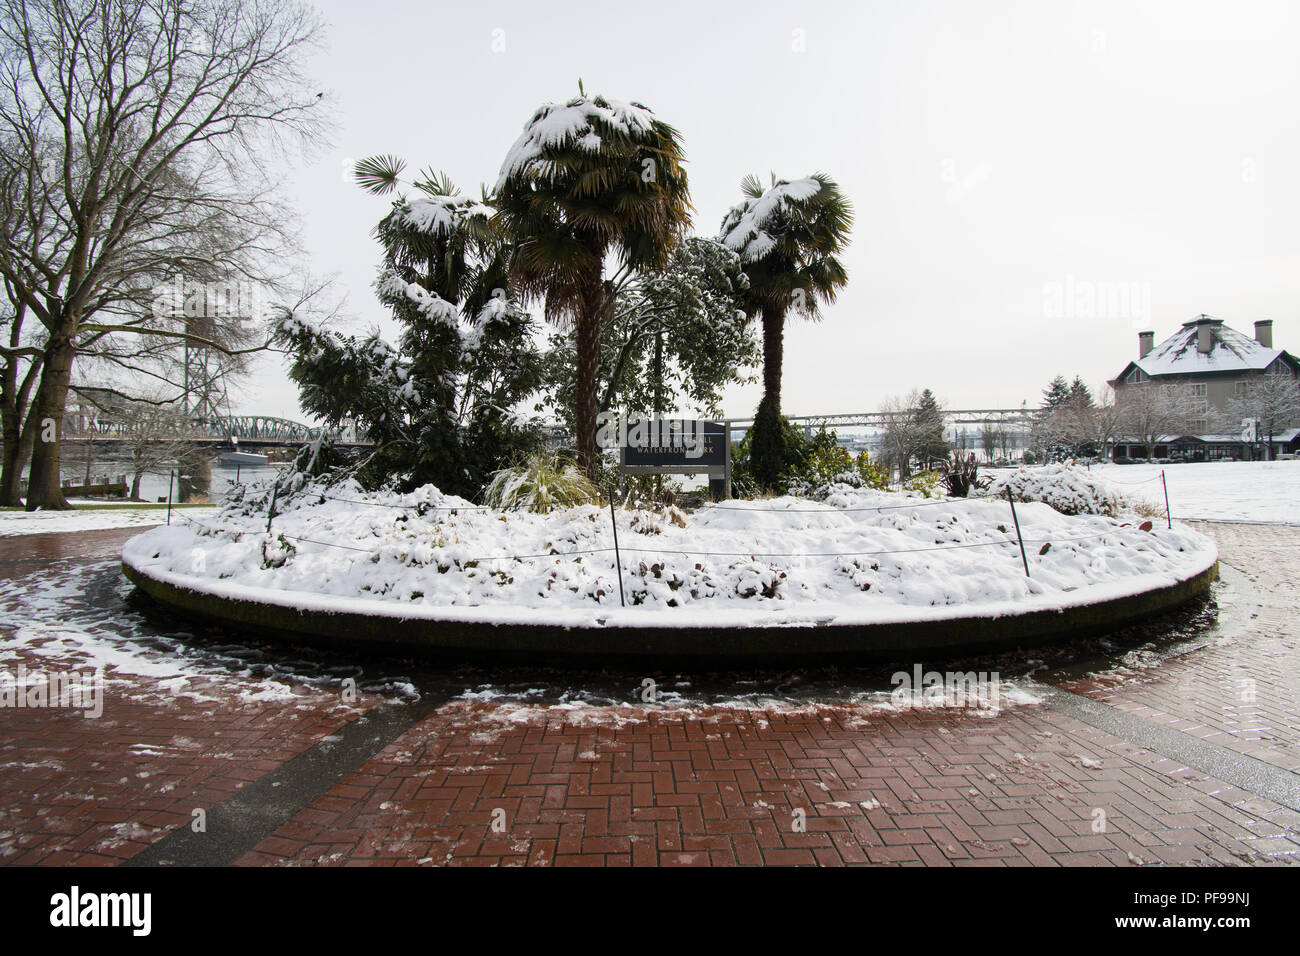 PORTLAND, OREGON, FEBRUARY 21 2018: Tom McCall Waterfront Park entrance sign with palm trees covered in snow in the morning. Stock Photo